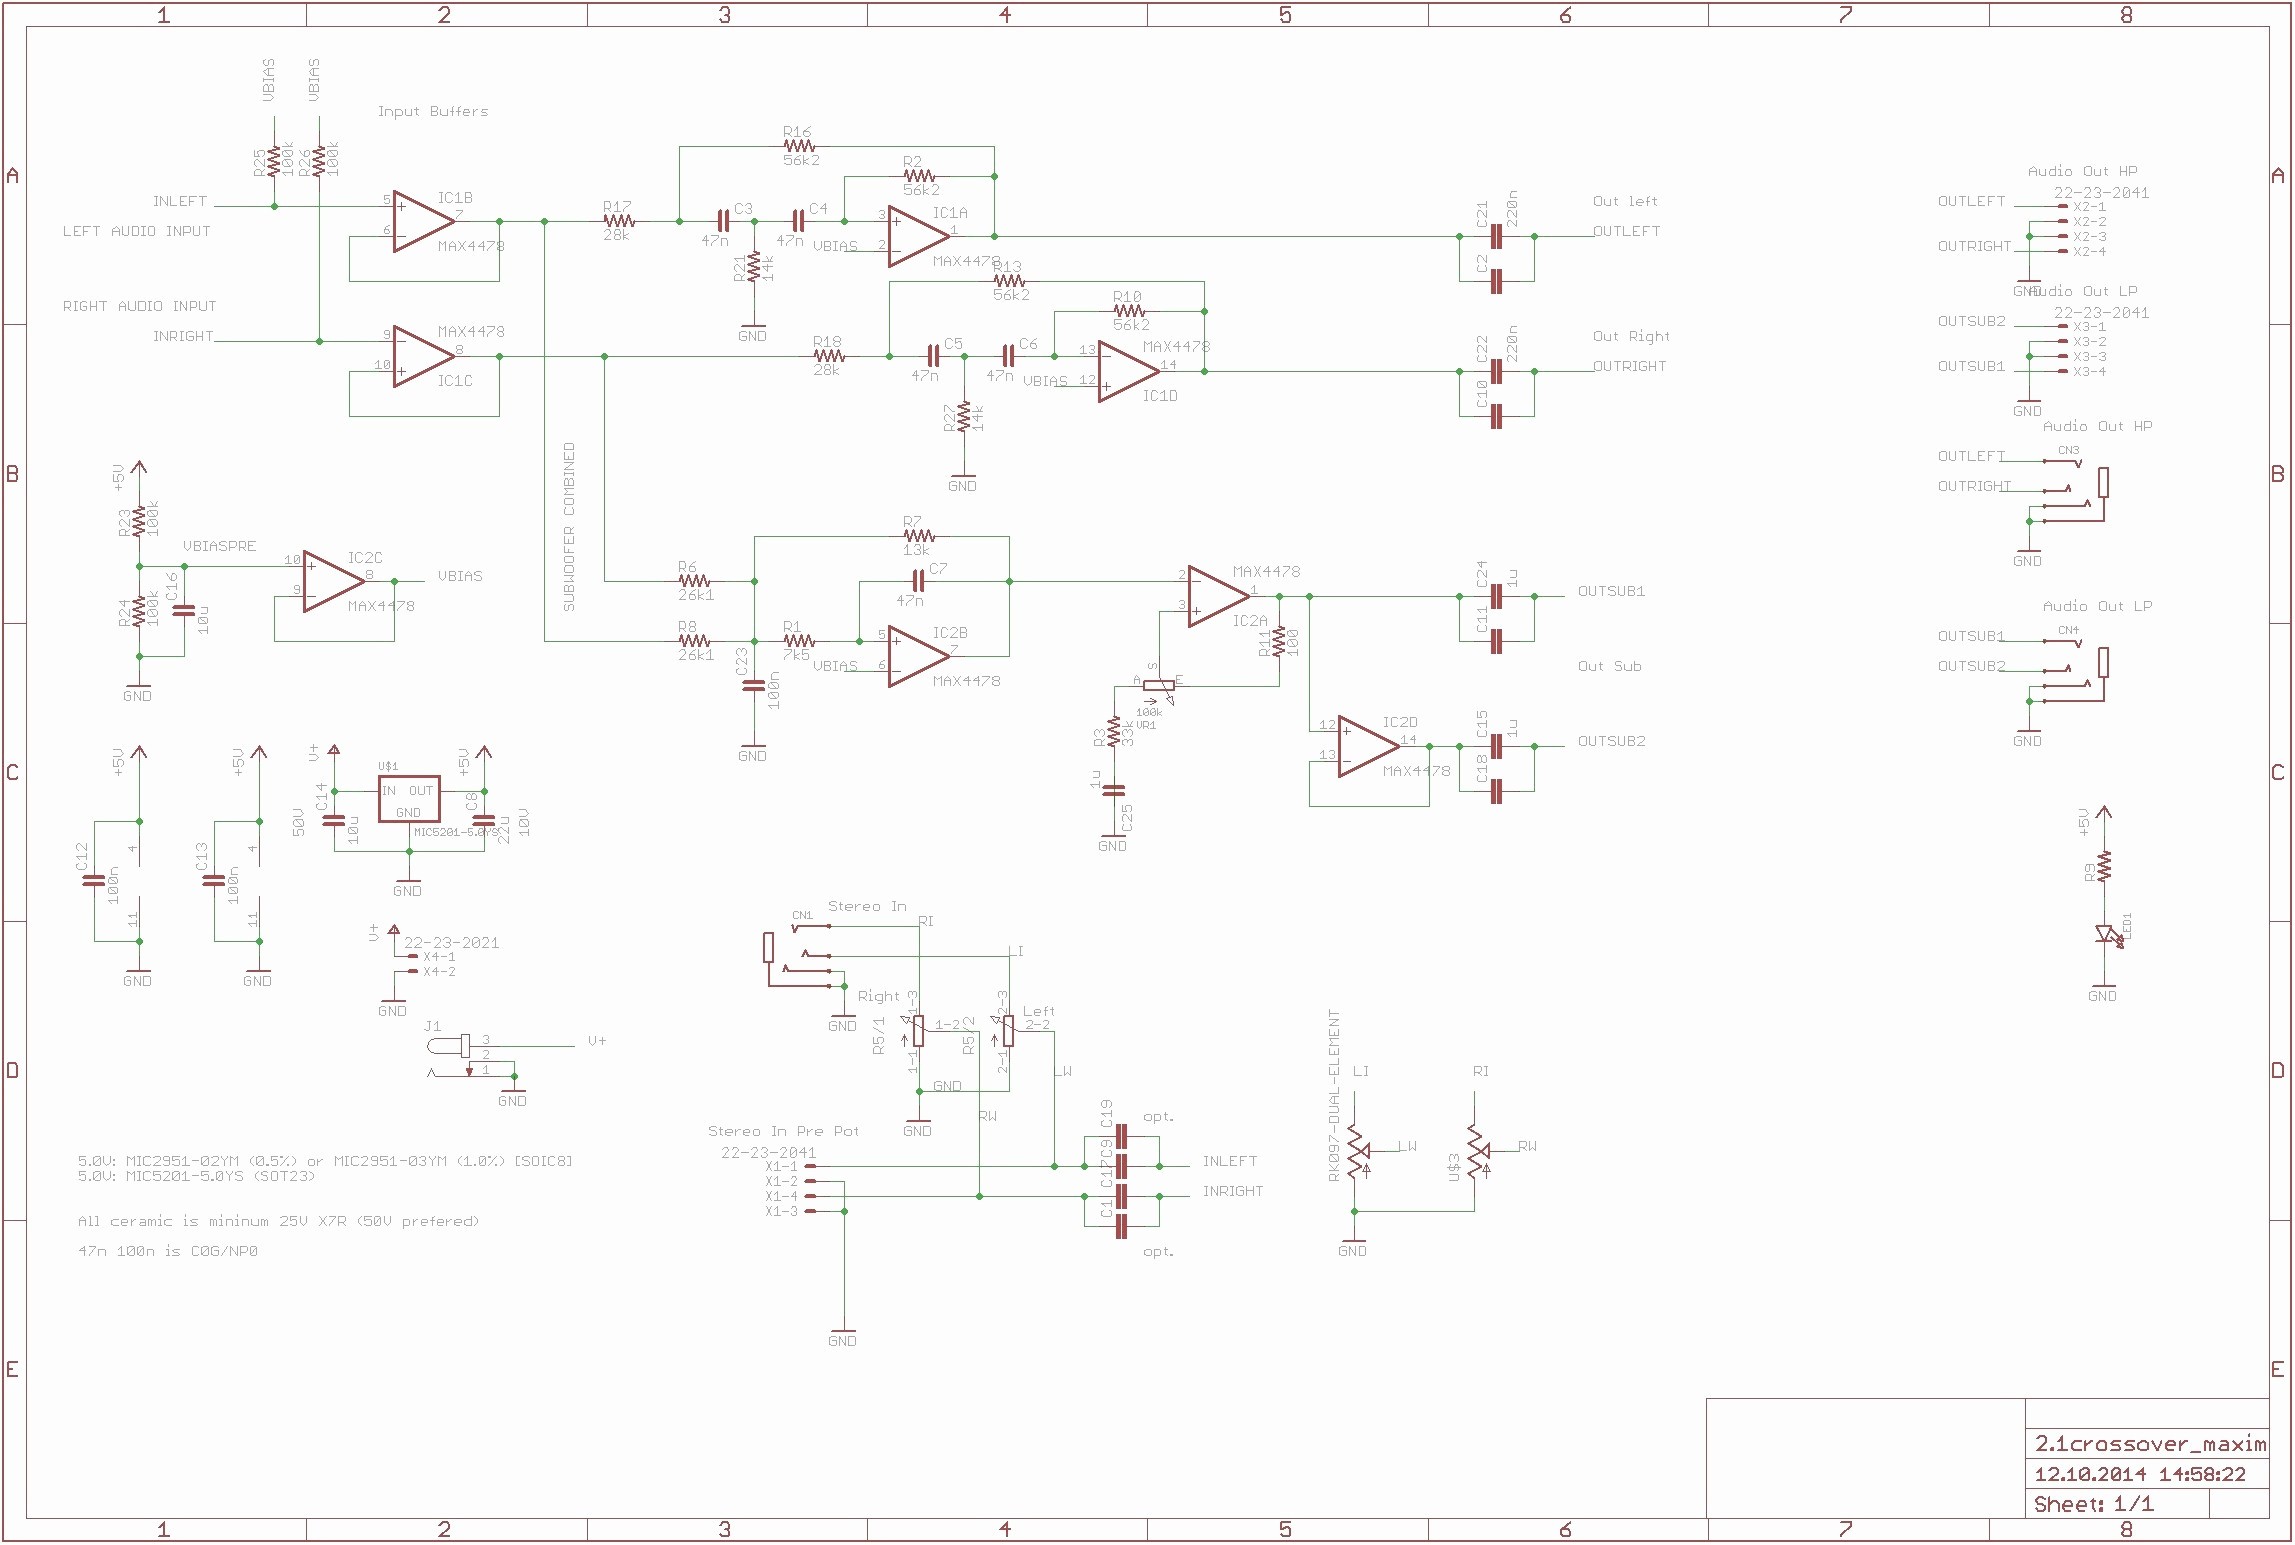 Air Conditioning thermostat Wiring Diagram Heater Wiring Diagram Valid Singular Heating and Cooling thermostat Of Air Conditioning thermostat Wiring Diagram